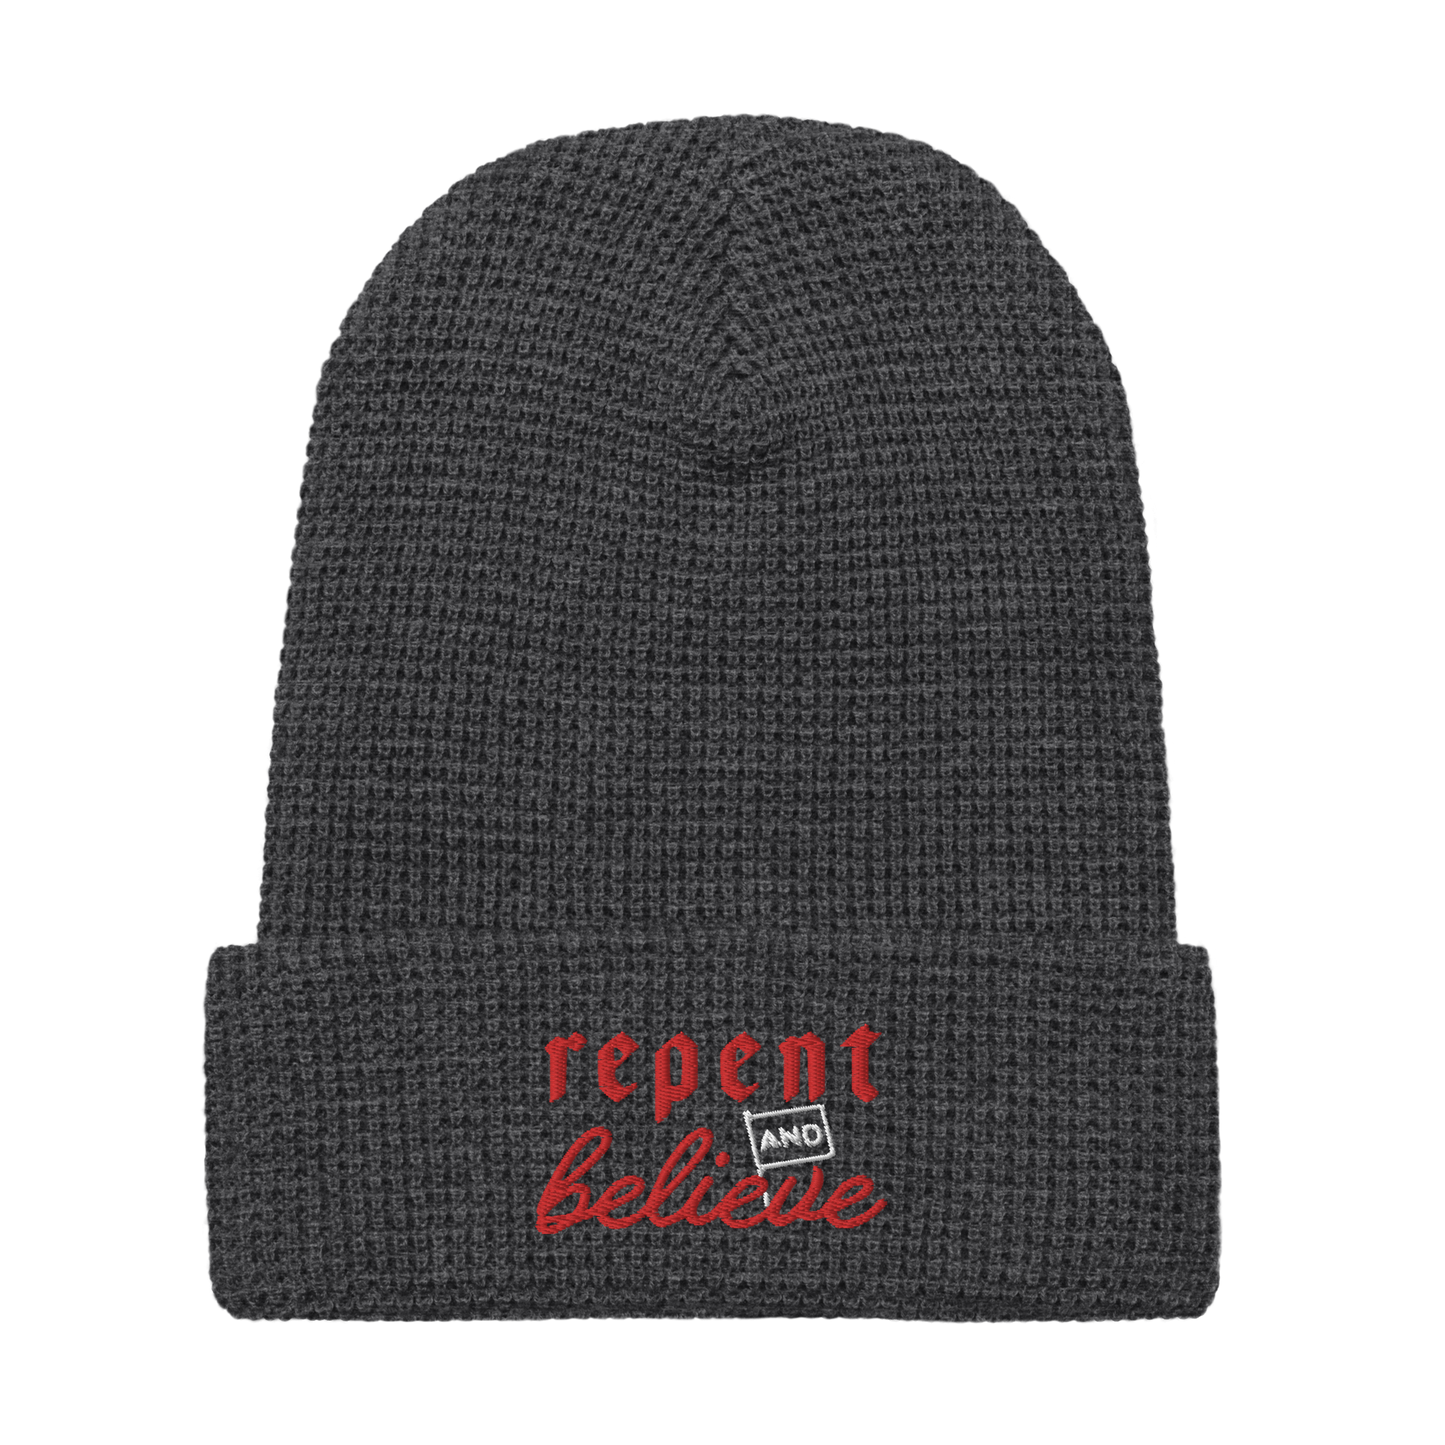 Repent and Believe Beanie